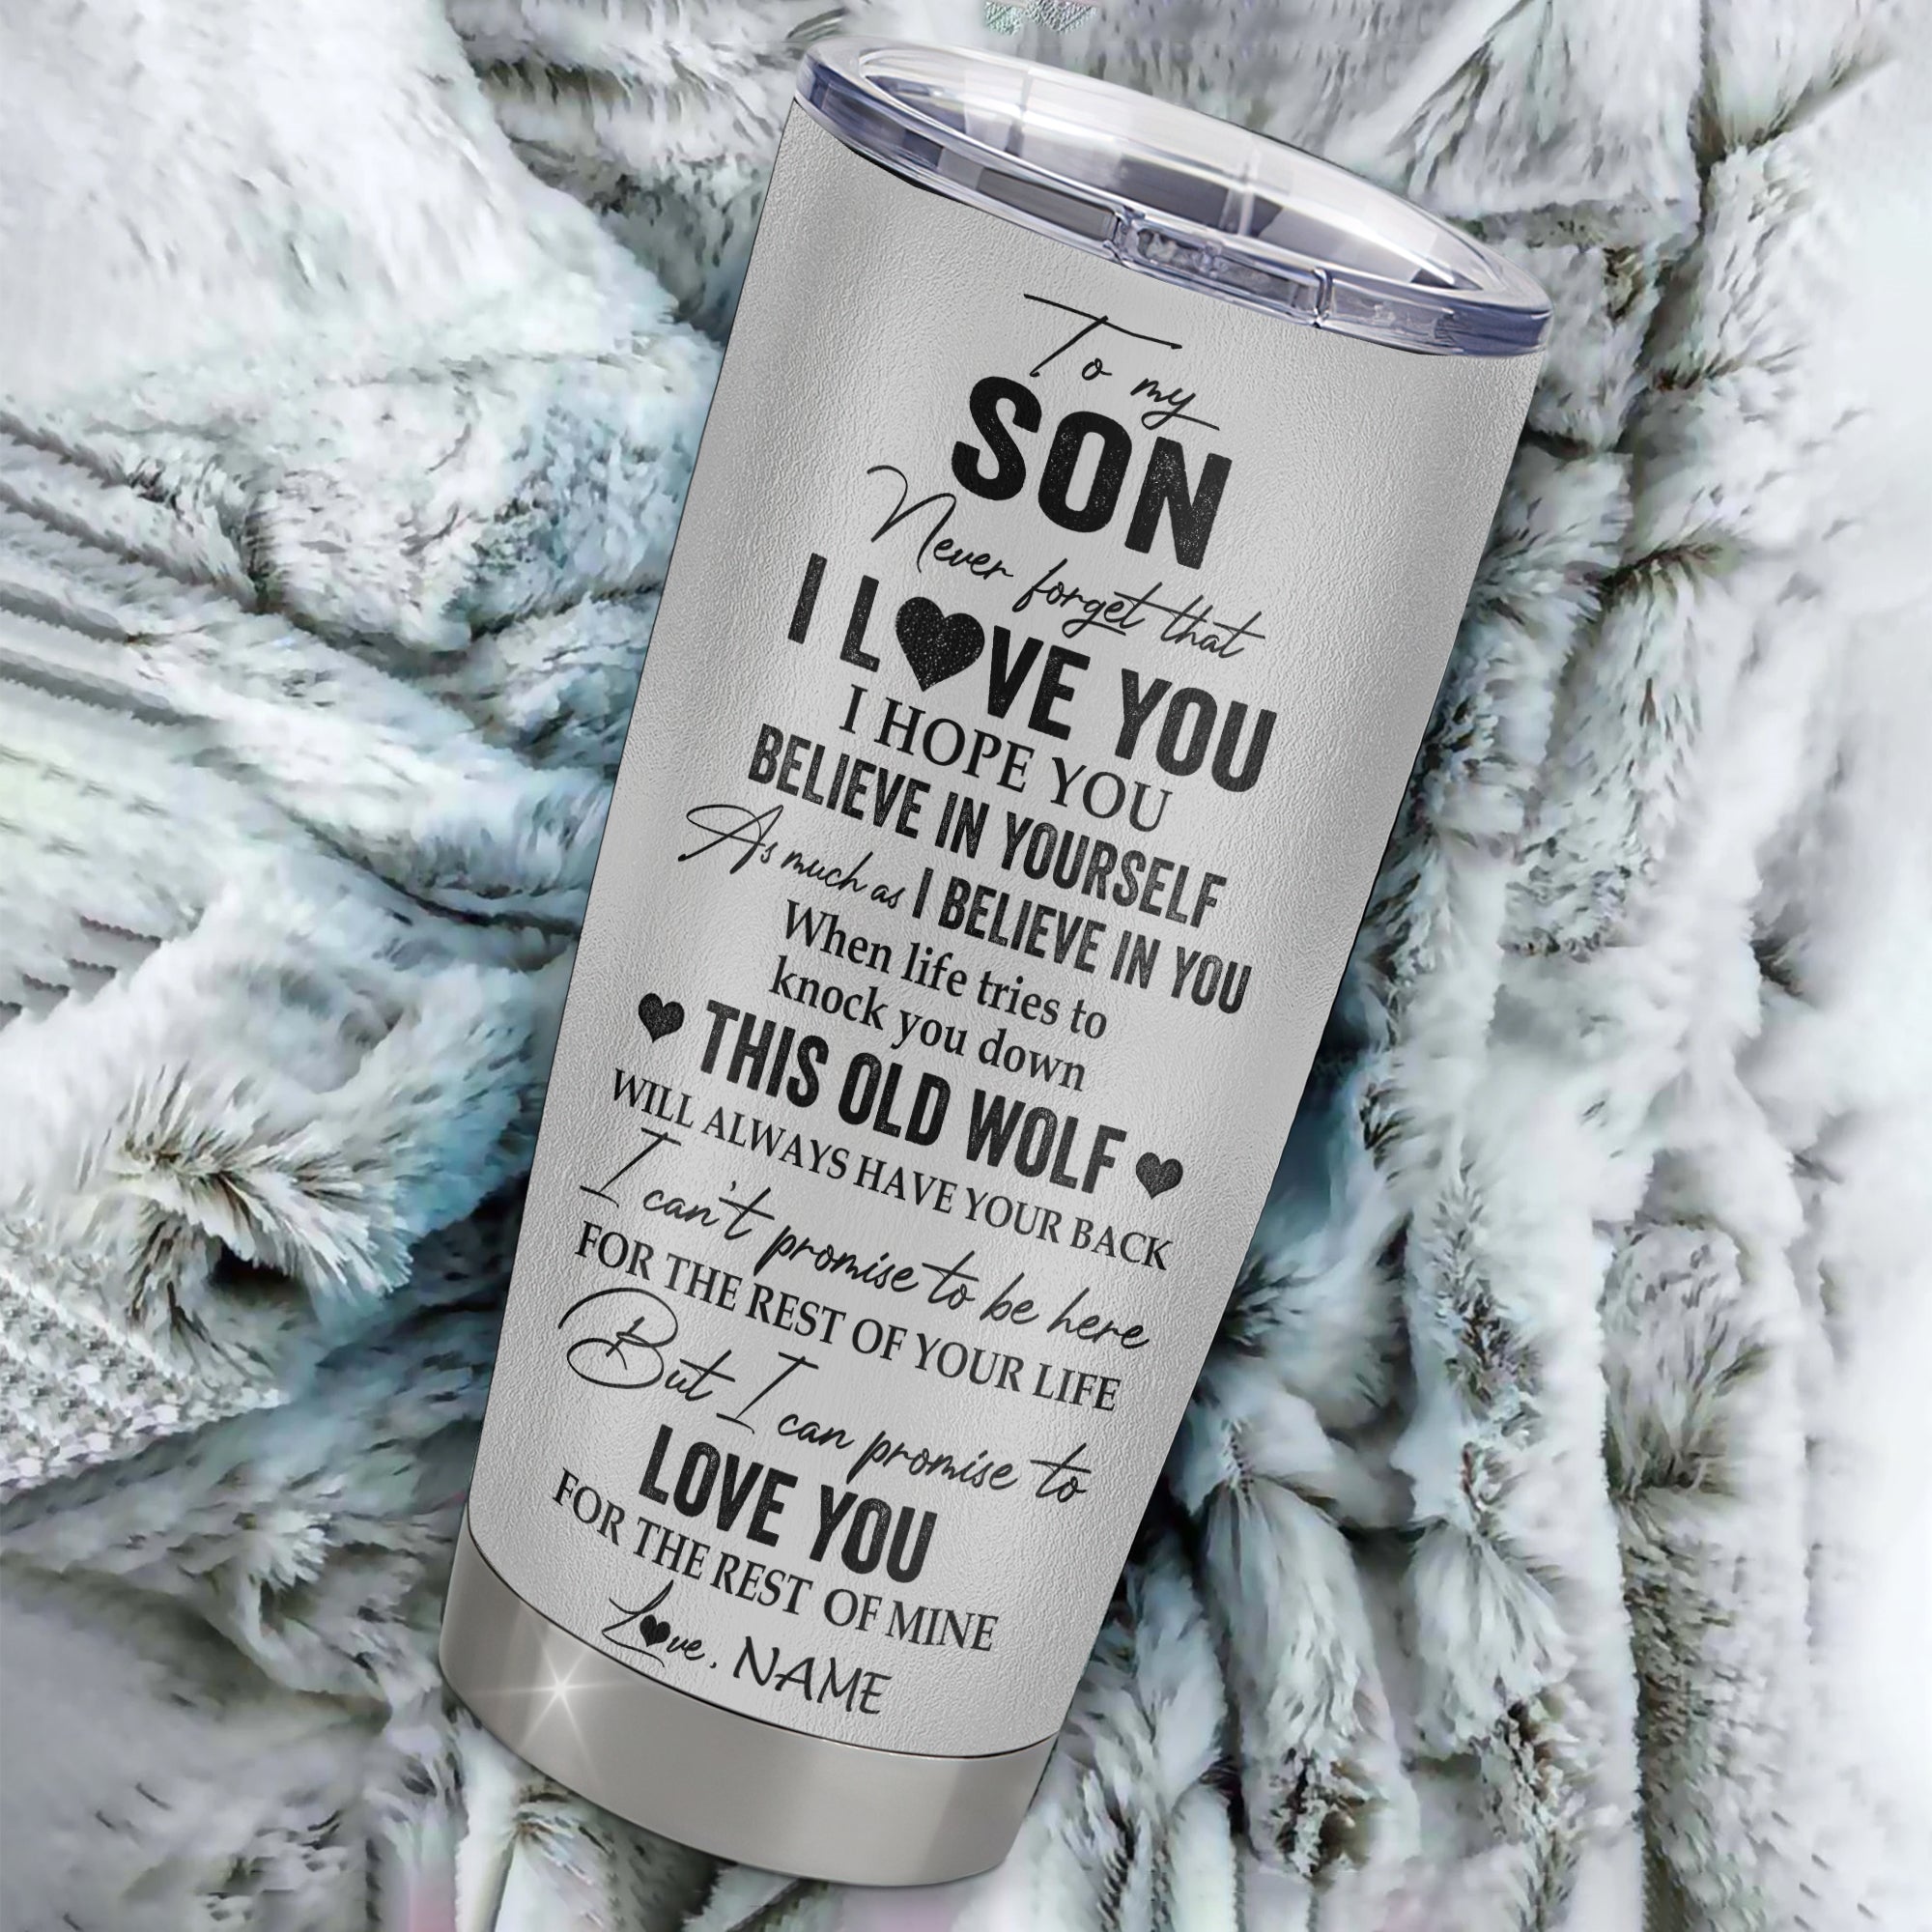 Personalized_To_My_Son_Tumbler_From_Mom_Dad_Father_Mother_Stainless_Steel_Cup_This_Old_Wolf_Love_You_Son_Birthday_Graduation_Christmas_Travel_Mug_Tumbler_mockup_1.jpg